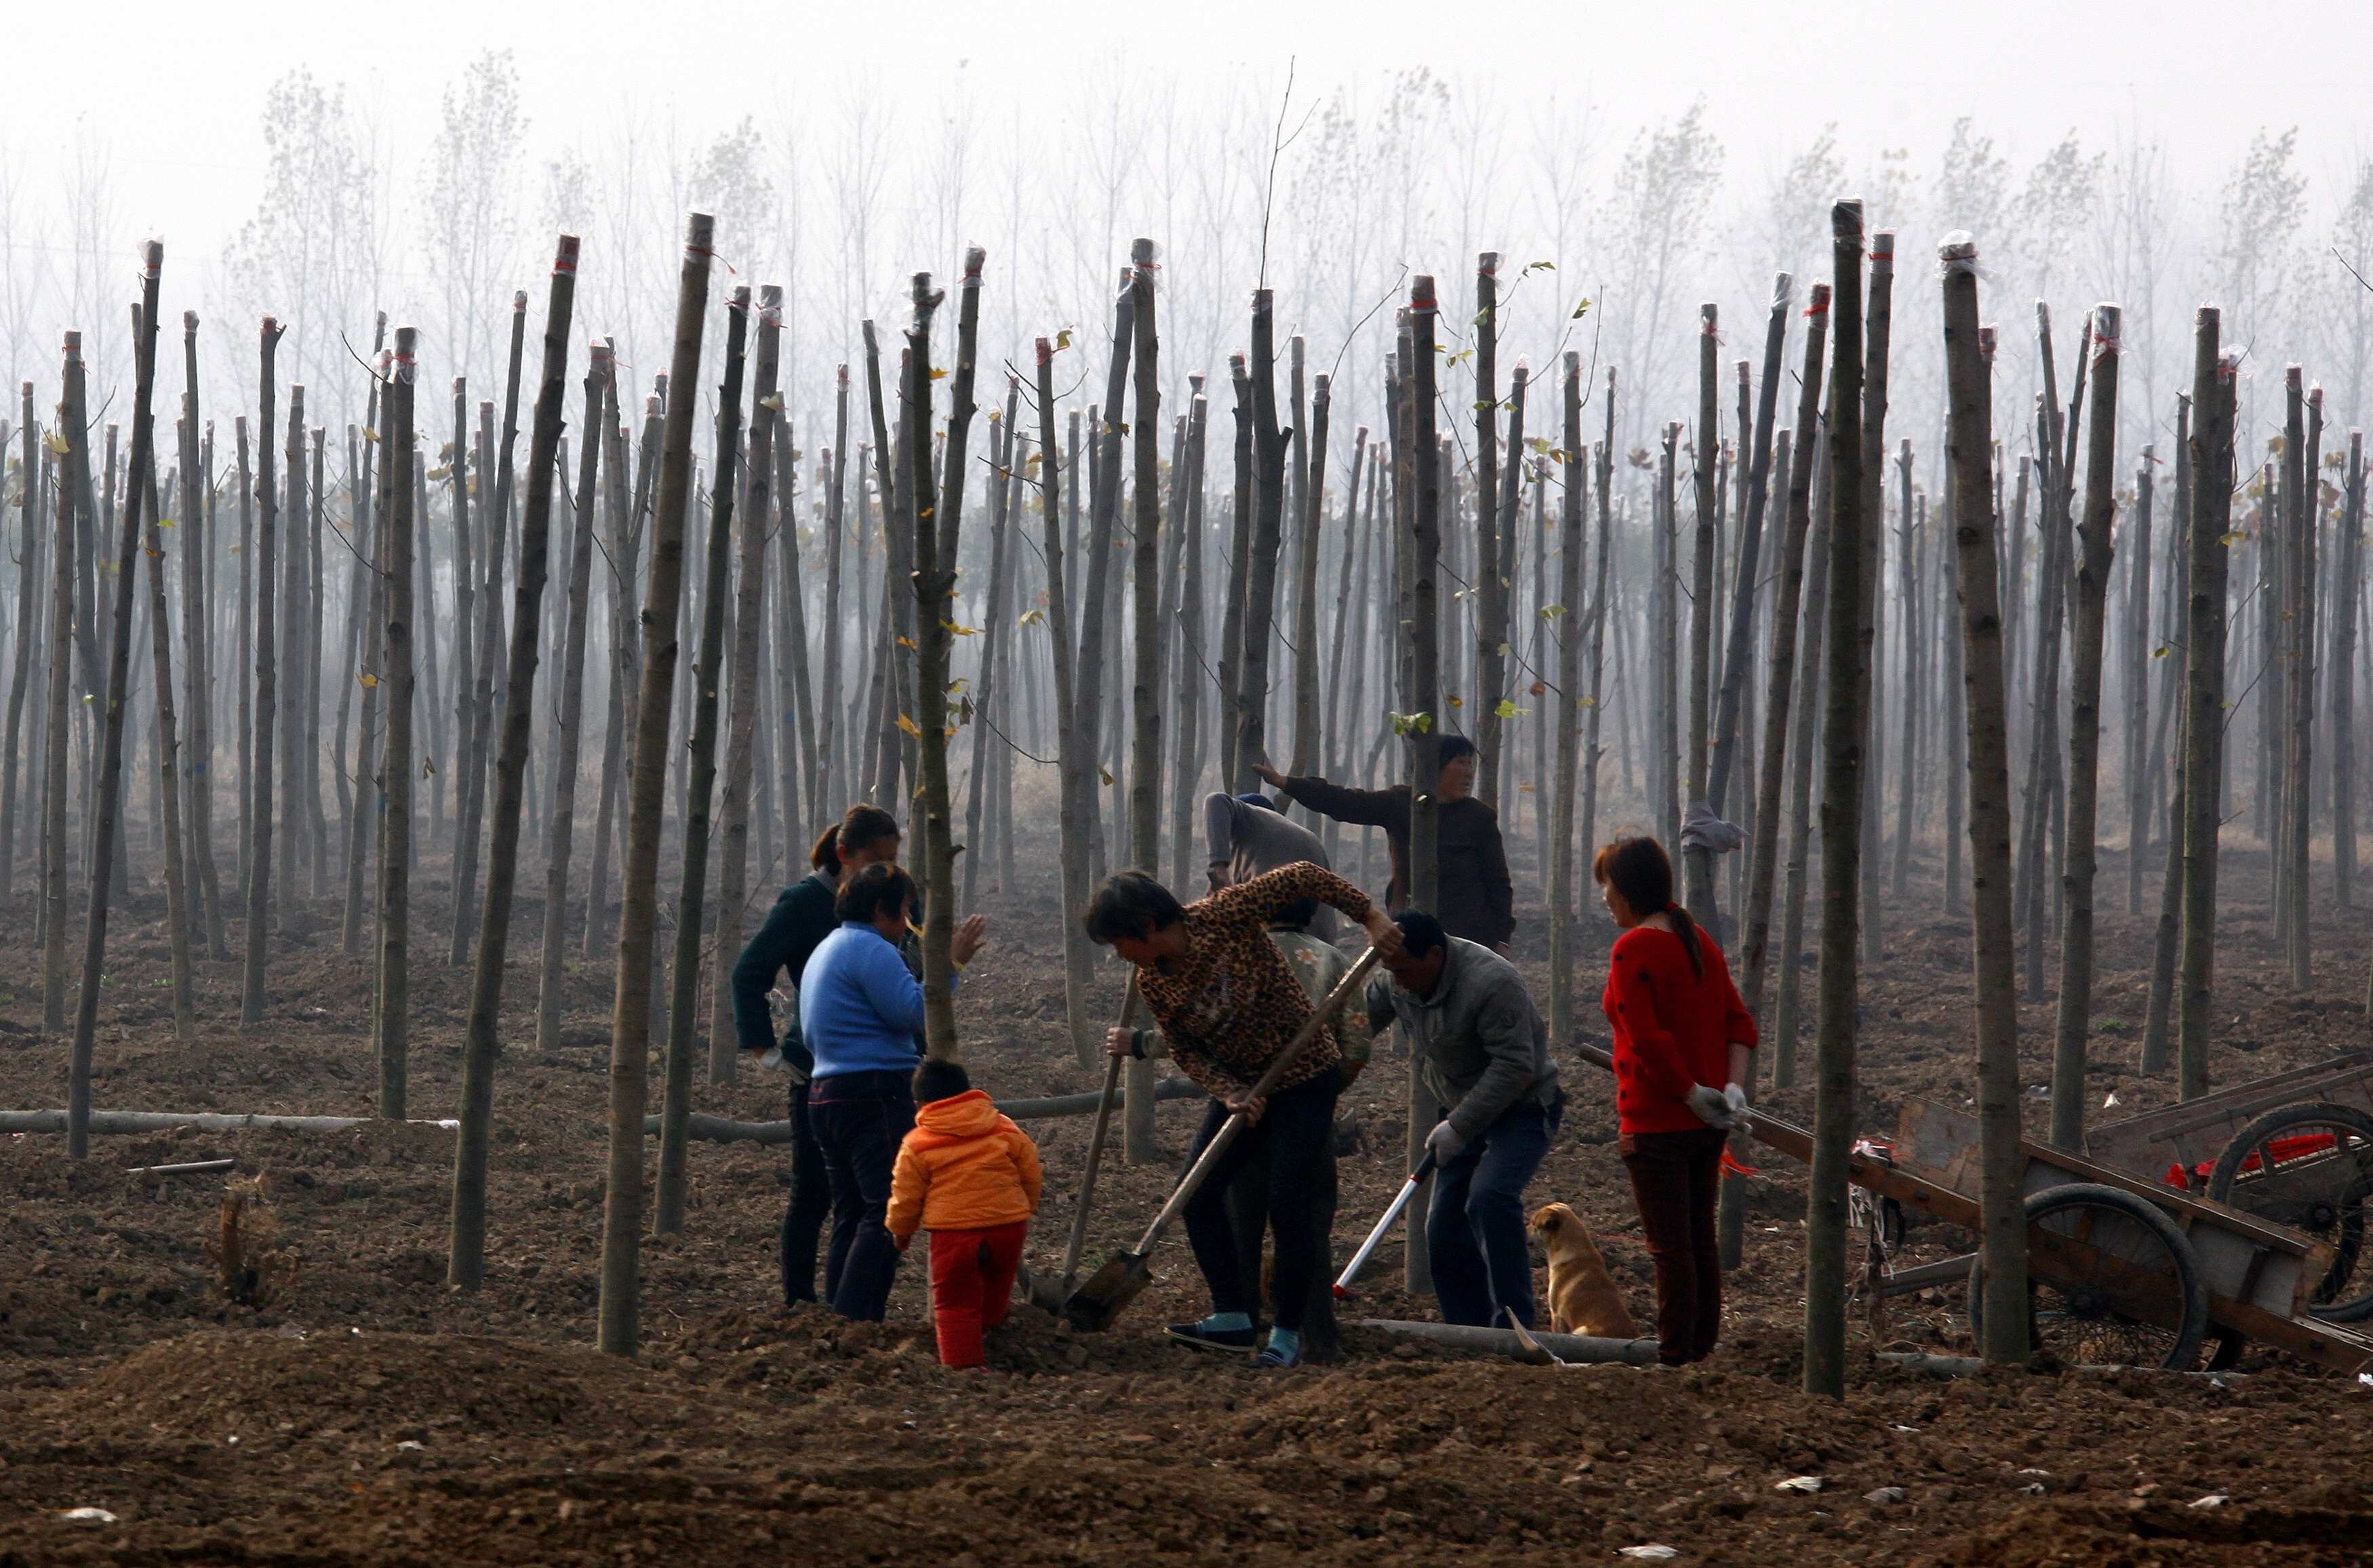 Residents plant trees in an attempt to rejuvenate the soil in Tianying, Anhui province, in 2012. Photo: Reuters